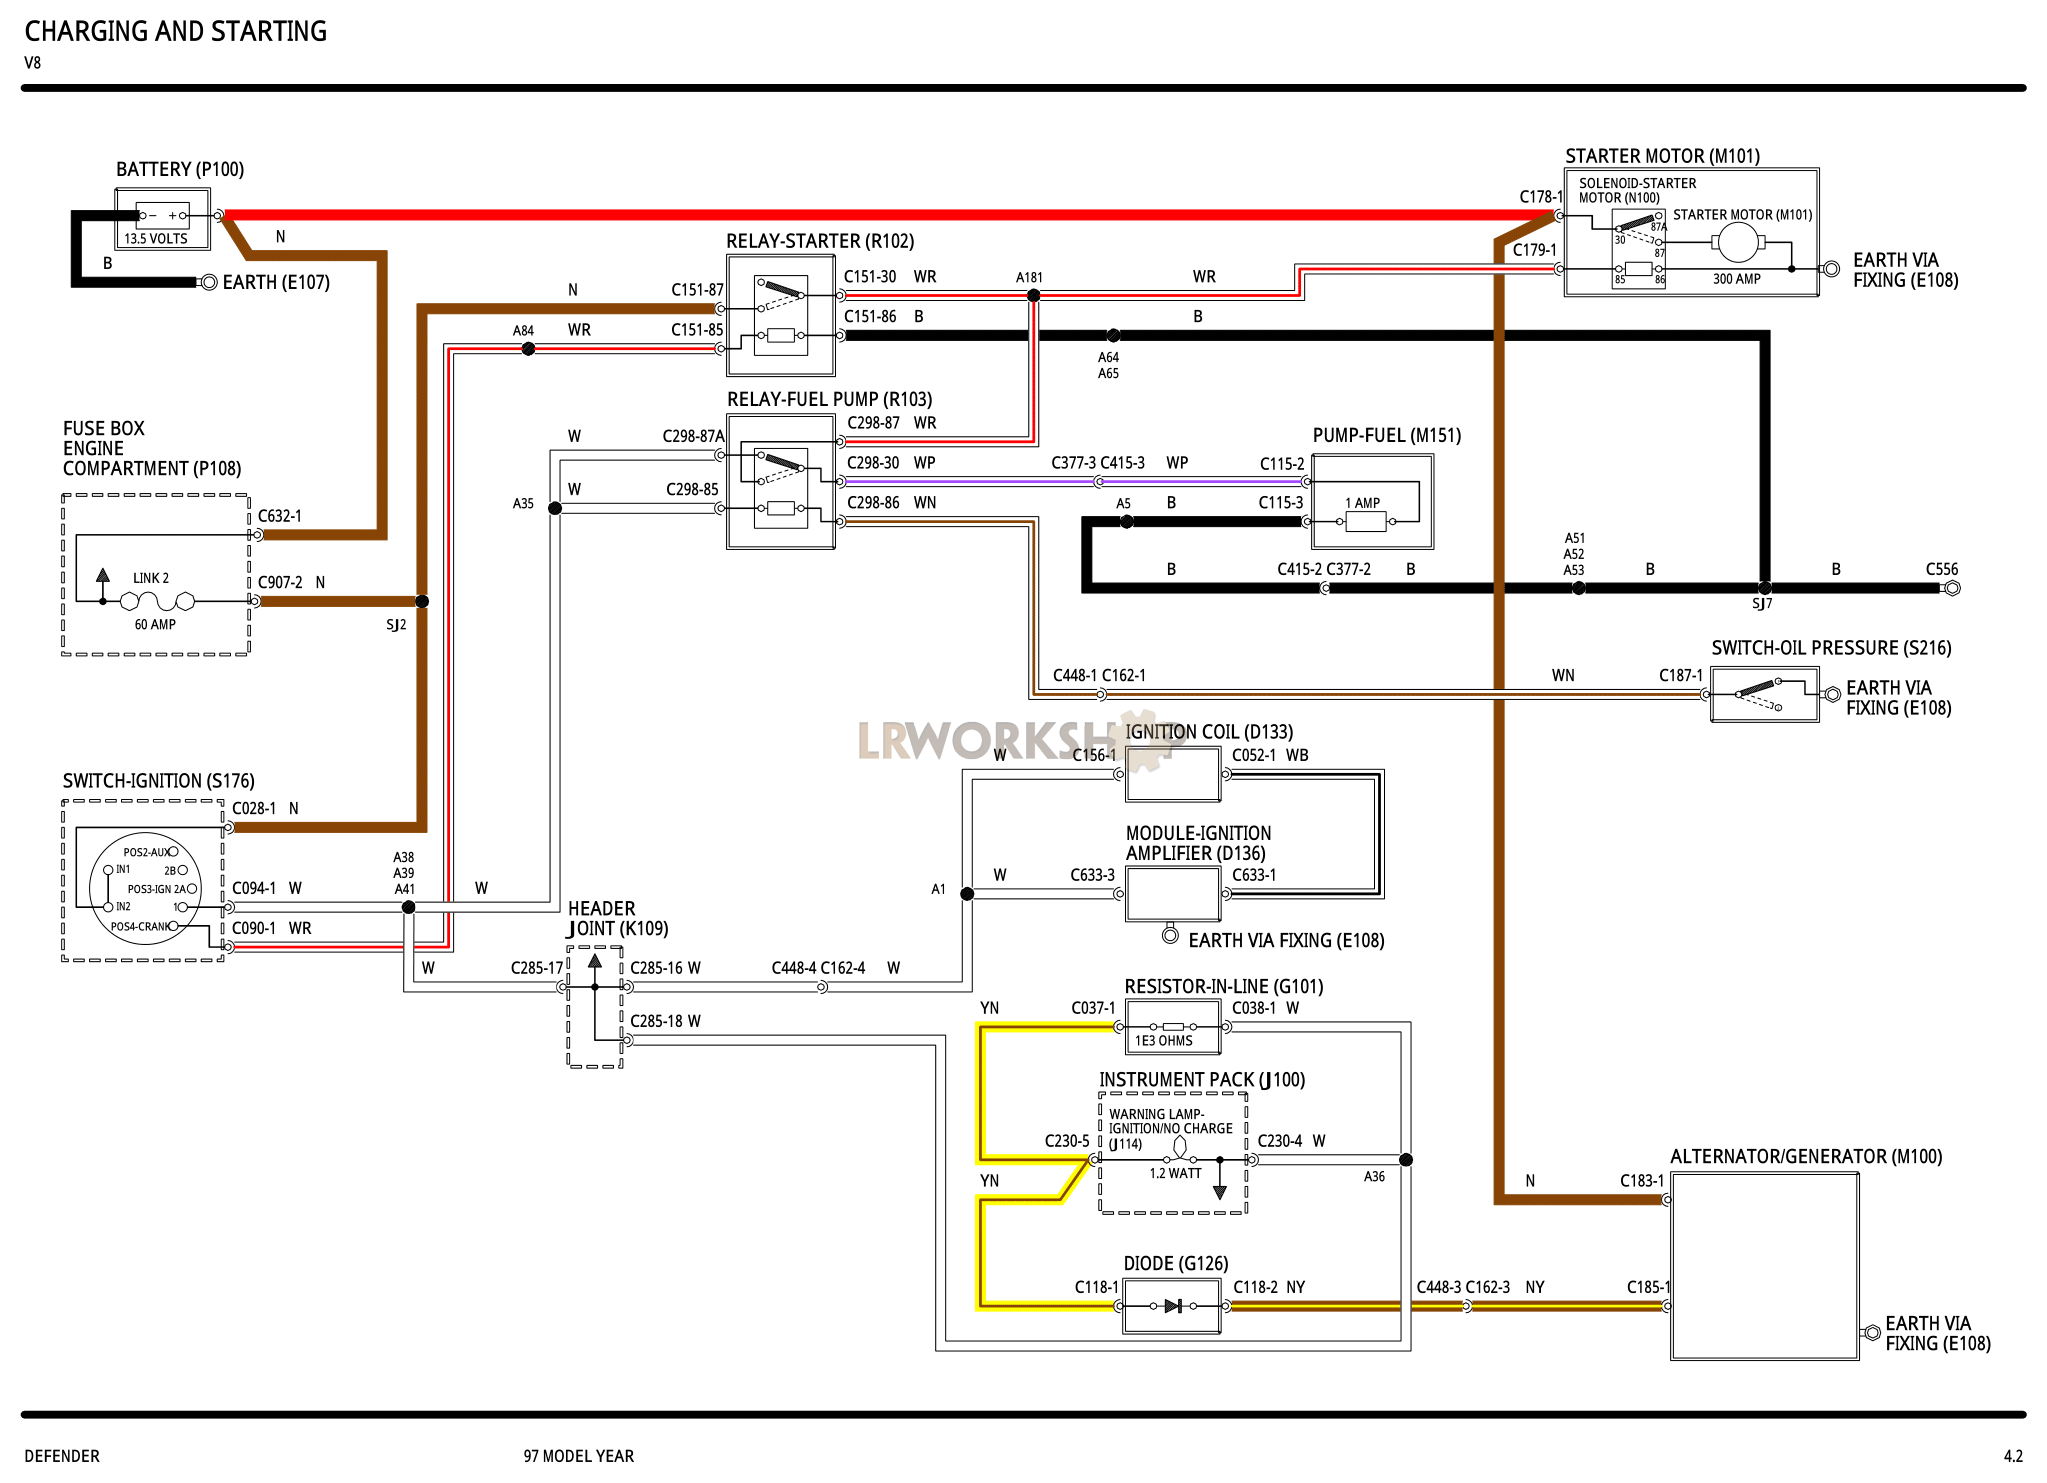 Charging and Starting Part Diagram